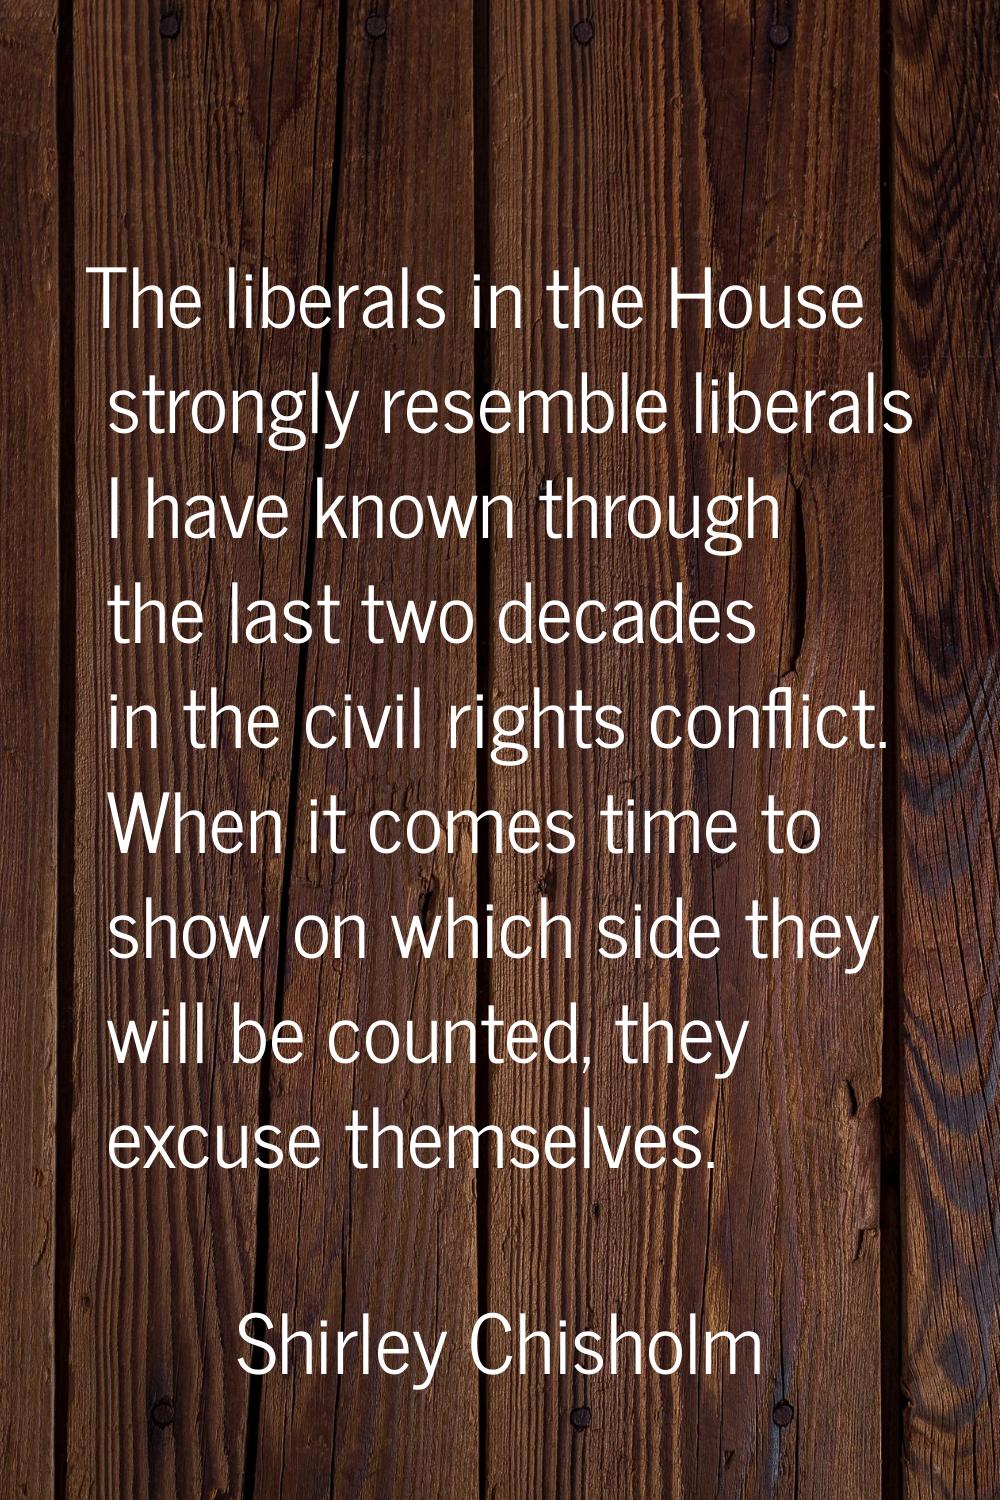 The liberals in the House strongly resemble liberals I have known through the last two decades in t